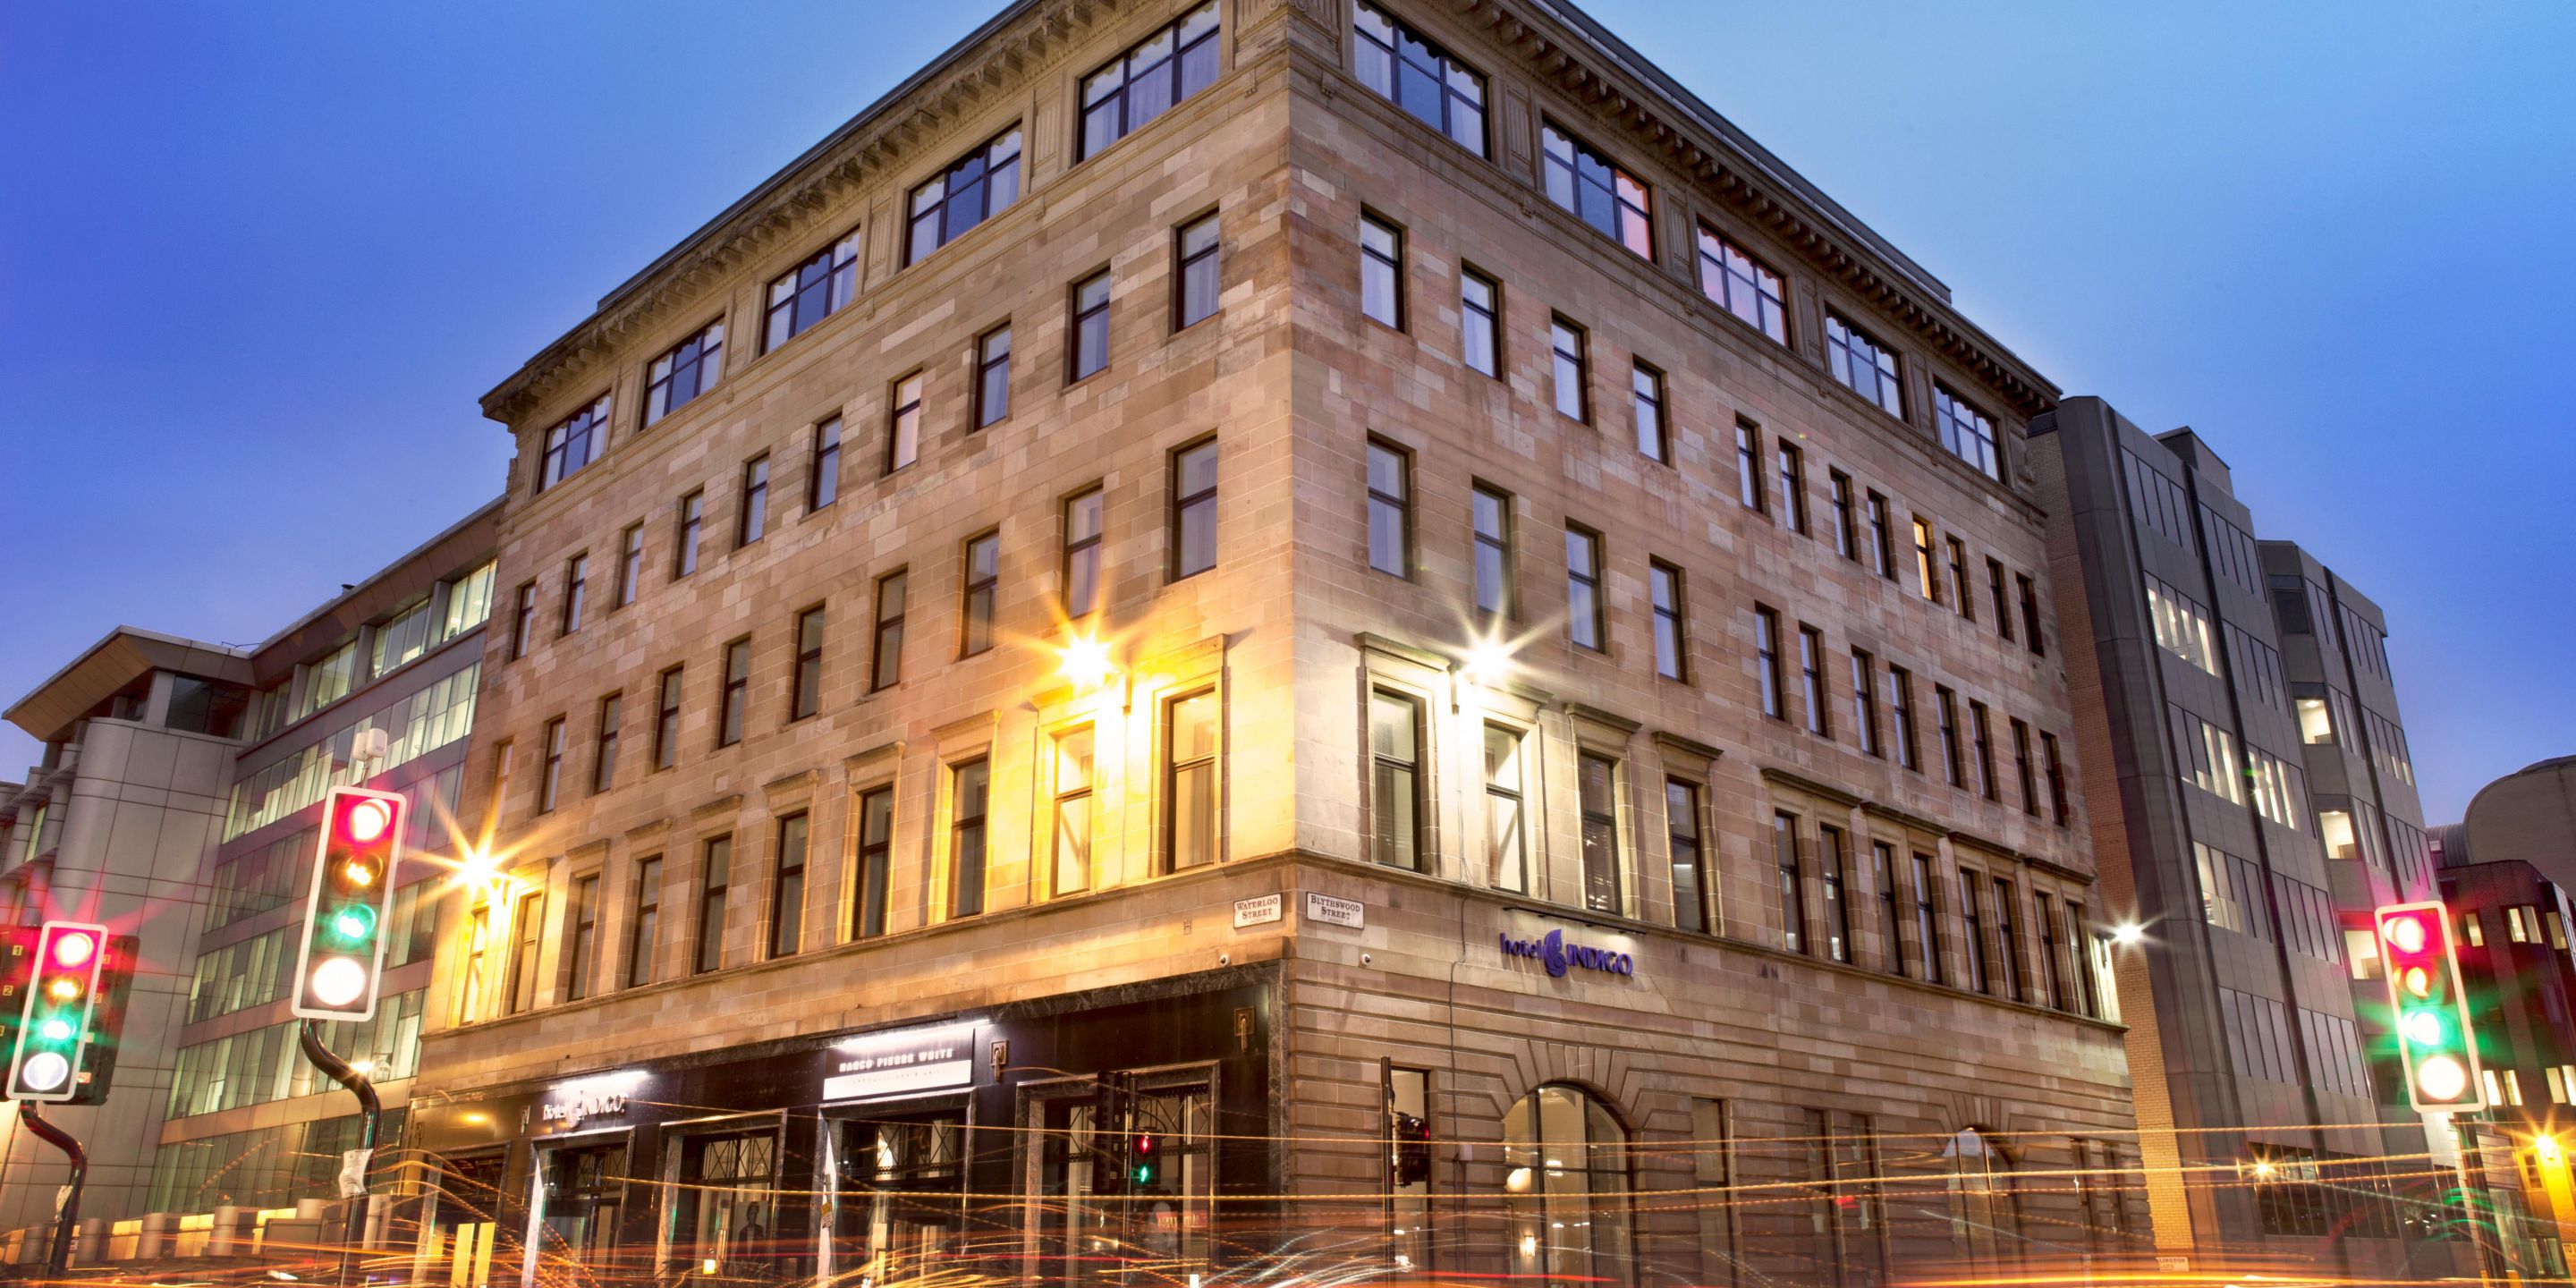 Glasgows Maven Capital Partners is selling the Hotel Indigo Glasgow in the center of the citys financial services district